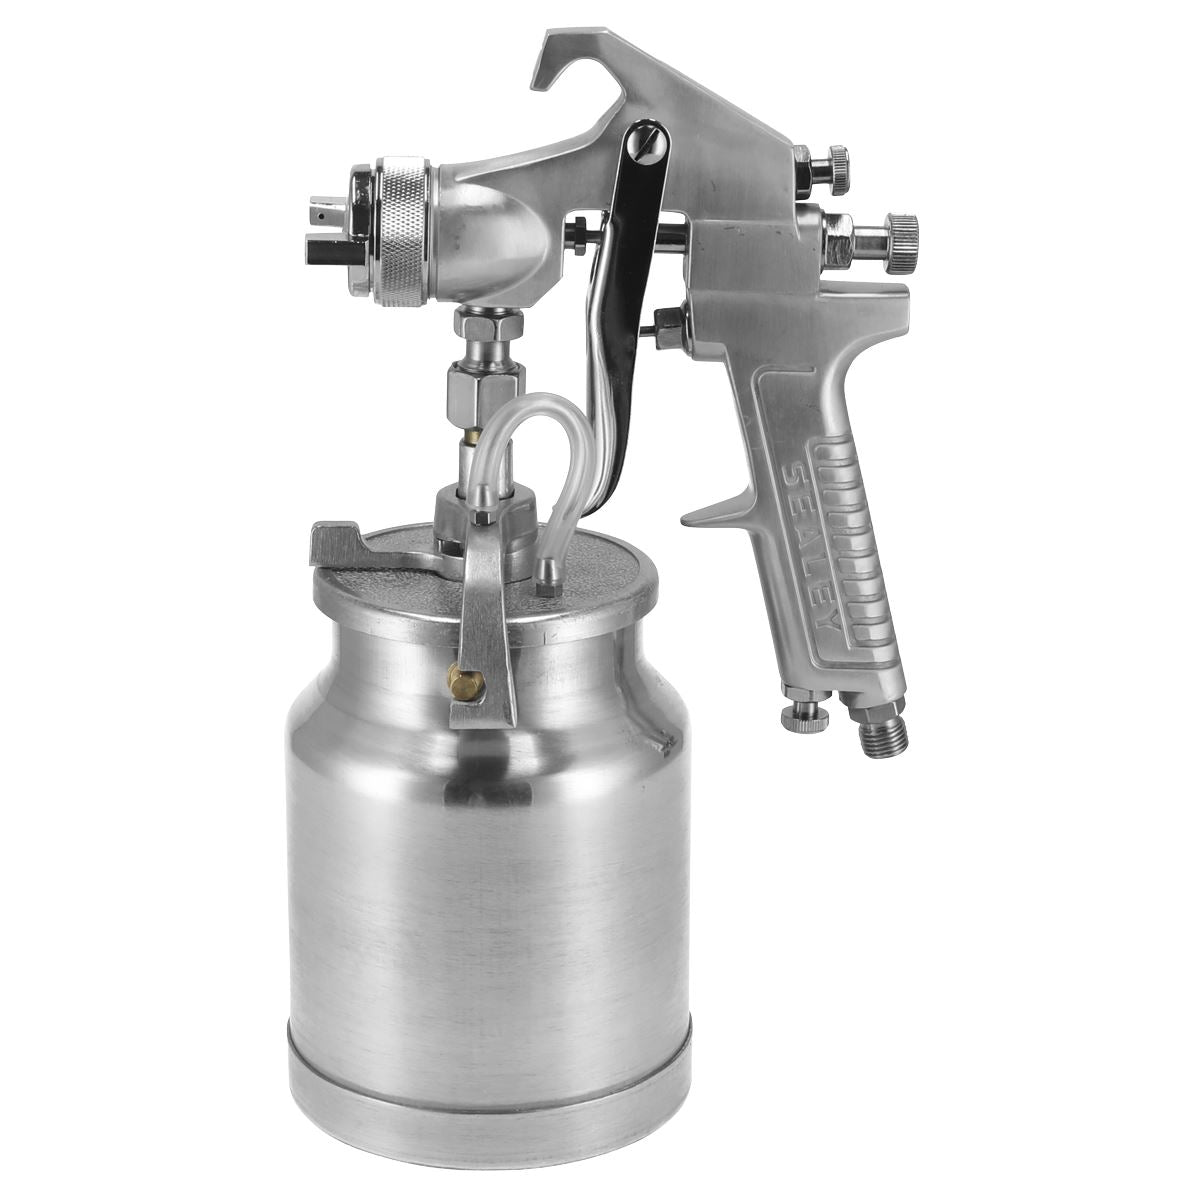 Sealey Spray Gun Suction Deluxe Professional 1.8mm Set-Up SSG1